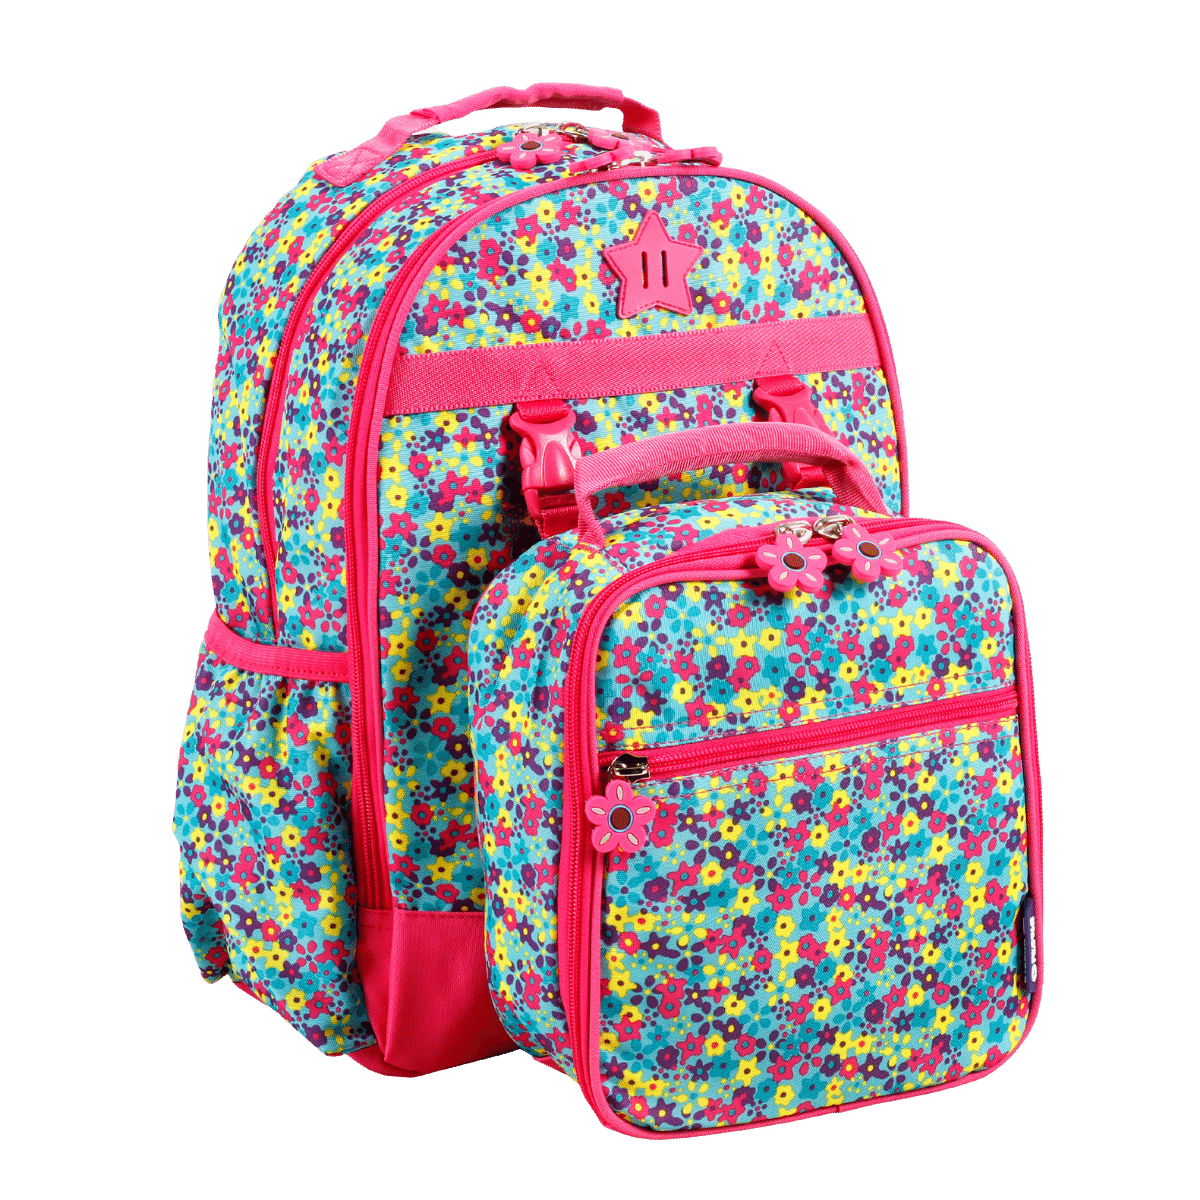 Kids Bags, Luggage, Backpacks, Lunch & More